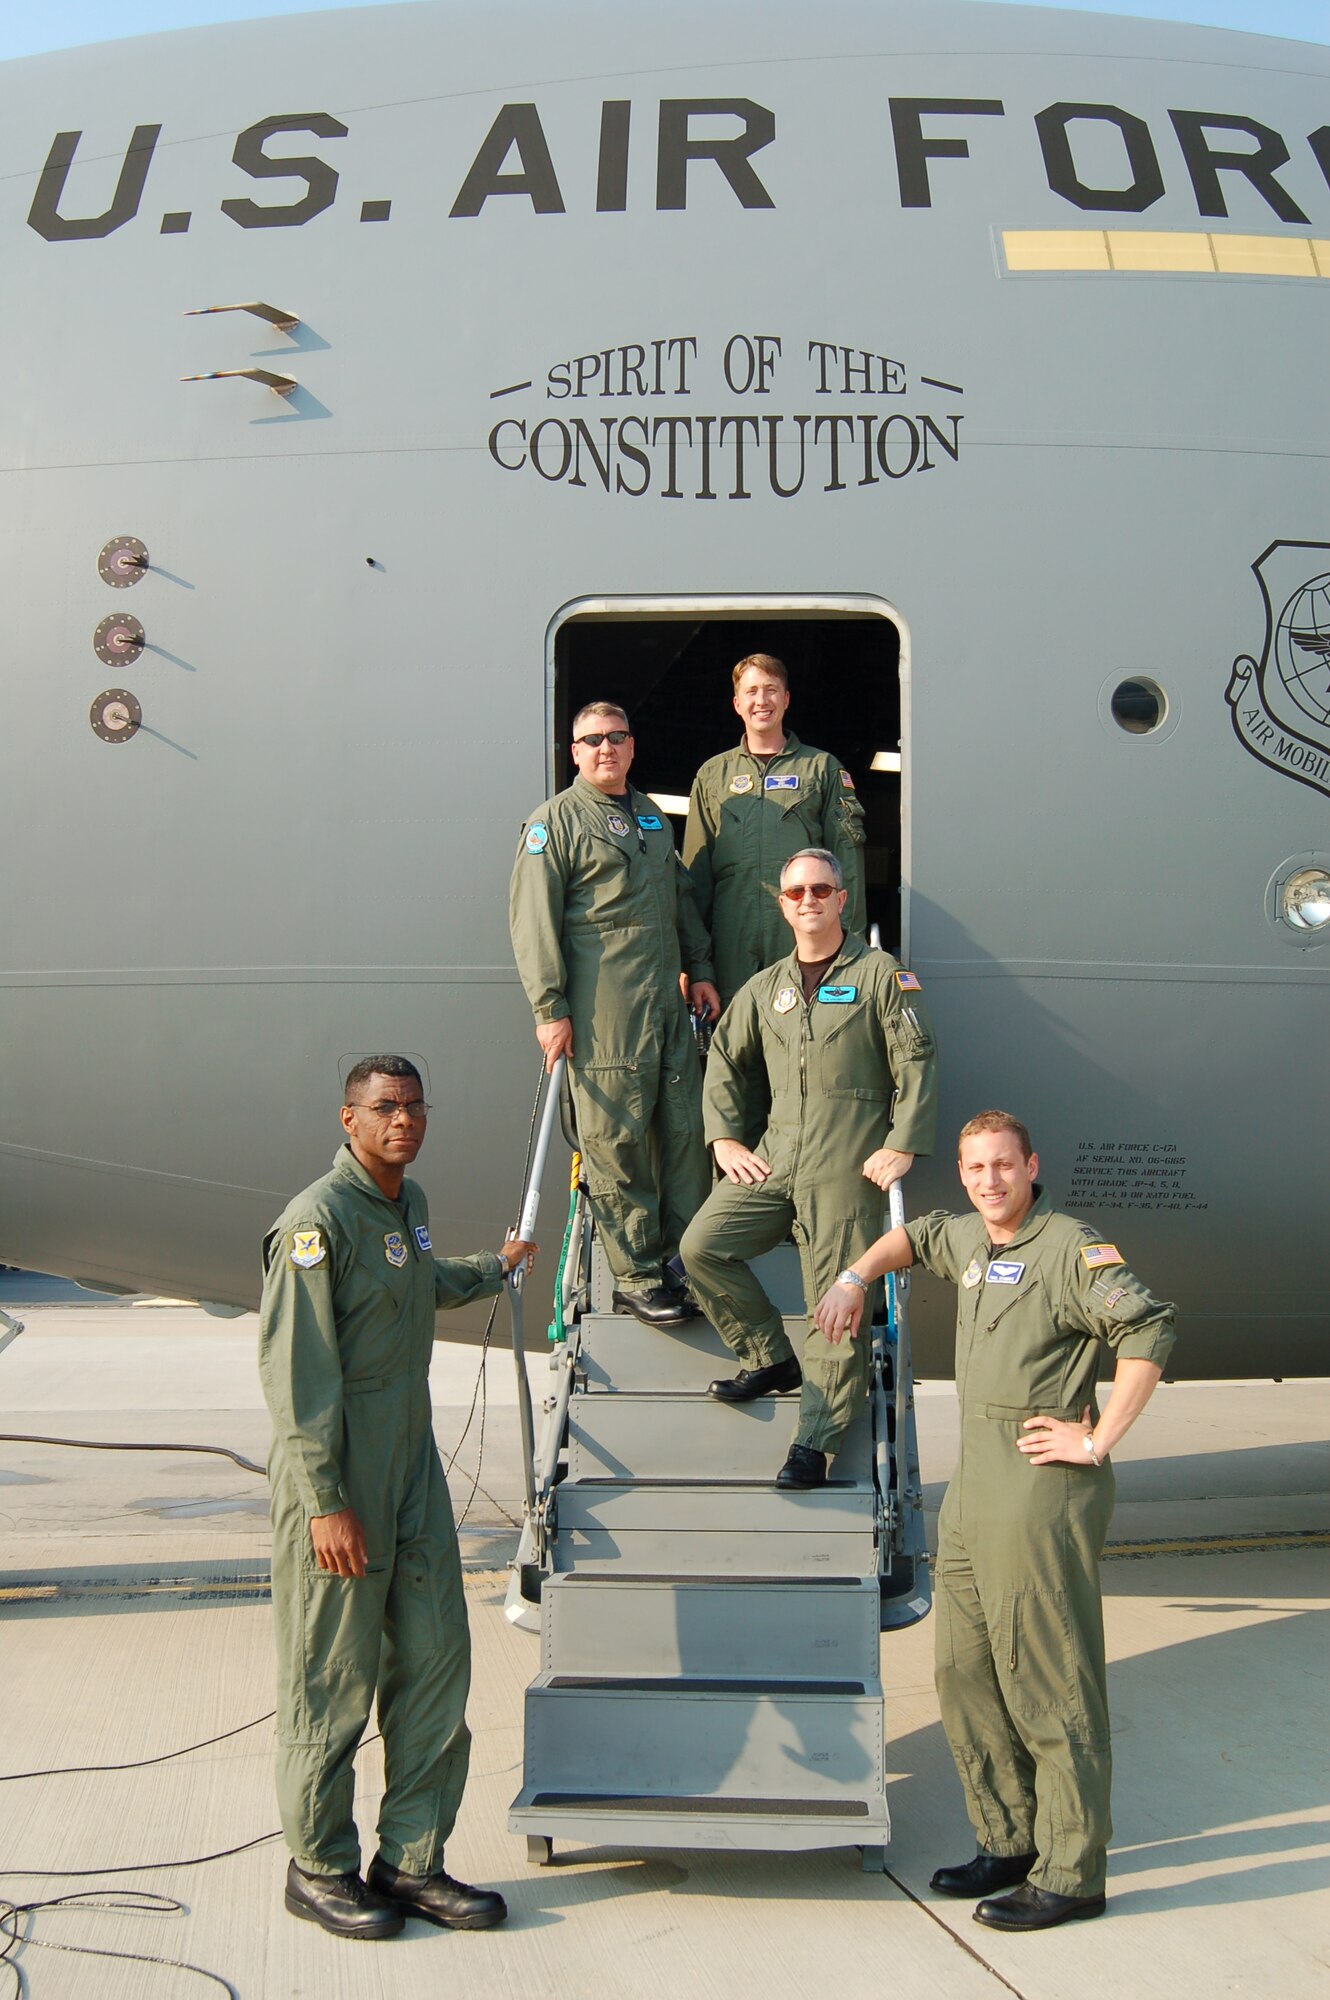 DOVER AIR FORCE BASE, Del. -- (Left to right) Master Sgt. Steve Rucker, 3rd Airlift Squadron loadmaster, Master Sgt. Mike Wright, 326th AS loadmaster, Maj. Justin Riddle, 3rd AS and the aircraft commander for this trip, Maj. Kevin Higginbotham, 326th AS, and Capt. Paul Scambos, 3rd Airlift Squadron's chief of C-17 tactics pose on the steps of Dover’s new C-17 Globemaster III after landing the aircraft at McGuire Air Force Base Thursday. The crew picked up the jet at Boeing’s Long Beach, Calif., production facility and flew it to McGuire, where it will remain until early Monday morning, when it will be flown to Dover and welcomed at a special arrival ceremony. (U.S. Air Force photo/2nd Lt. Nicole Langley)